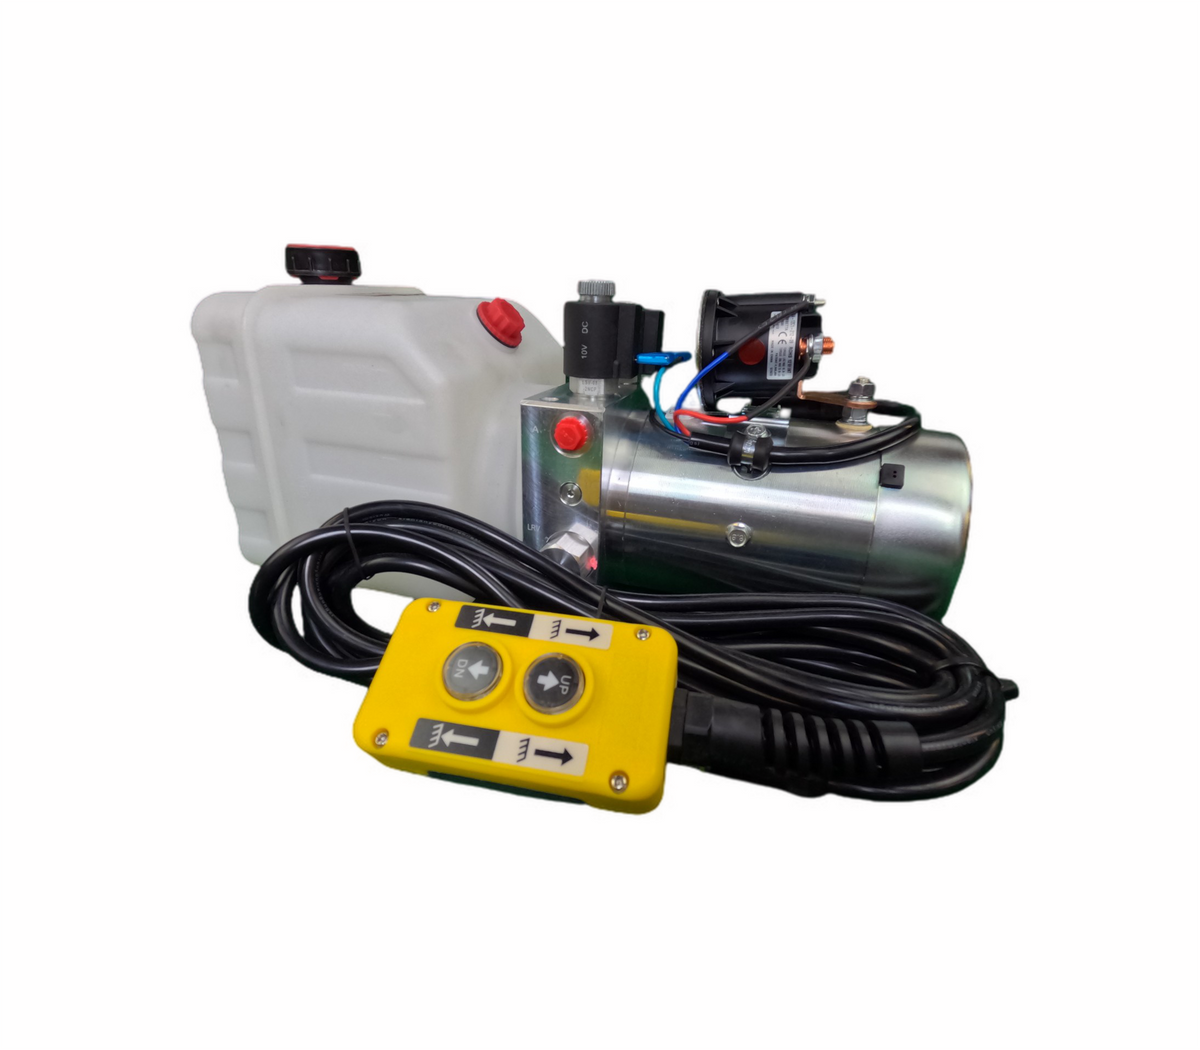 DLH 12V Double-Acting Hydraulic Pump - Poly Reservoir: A machine with a yellow rectangular device, buttons, and a remote control, offering reliable hydraulic power for dump bed trailers and trucks.